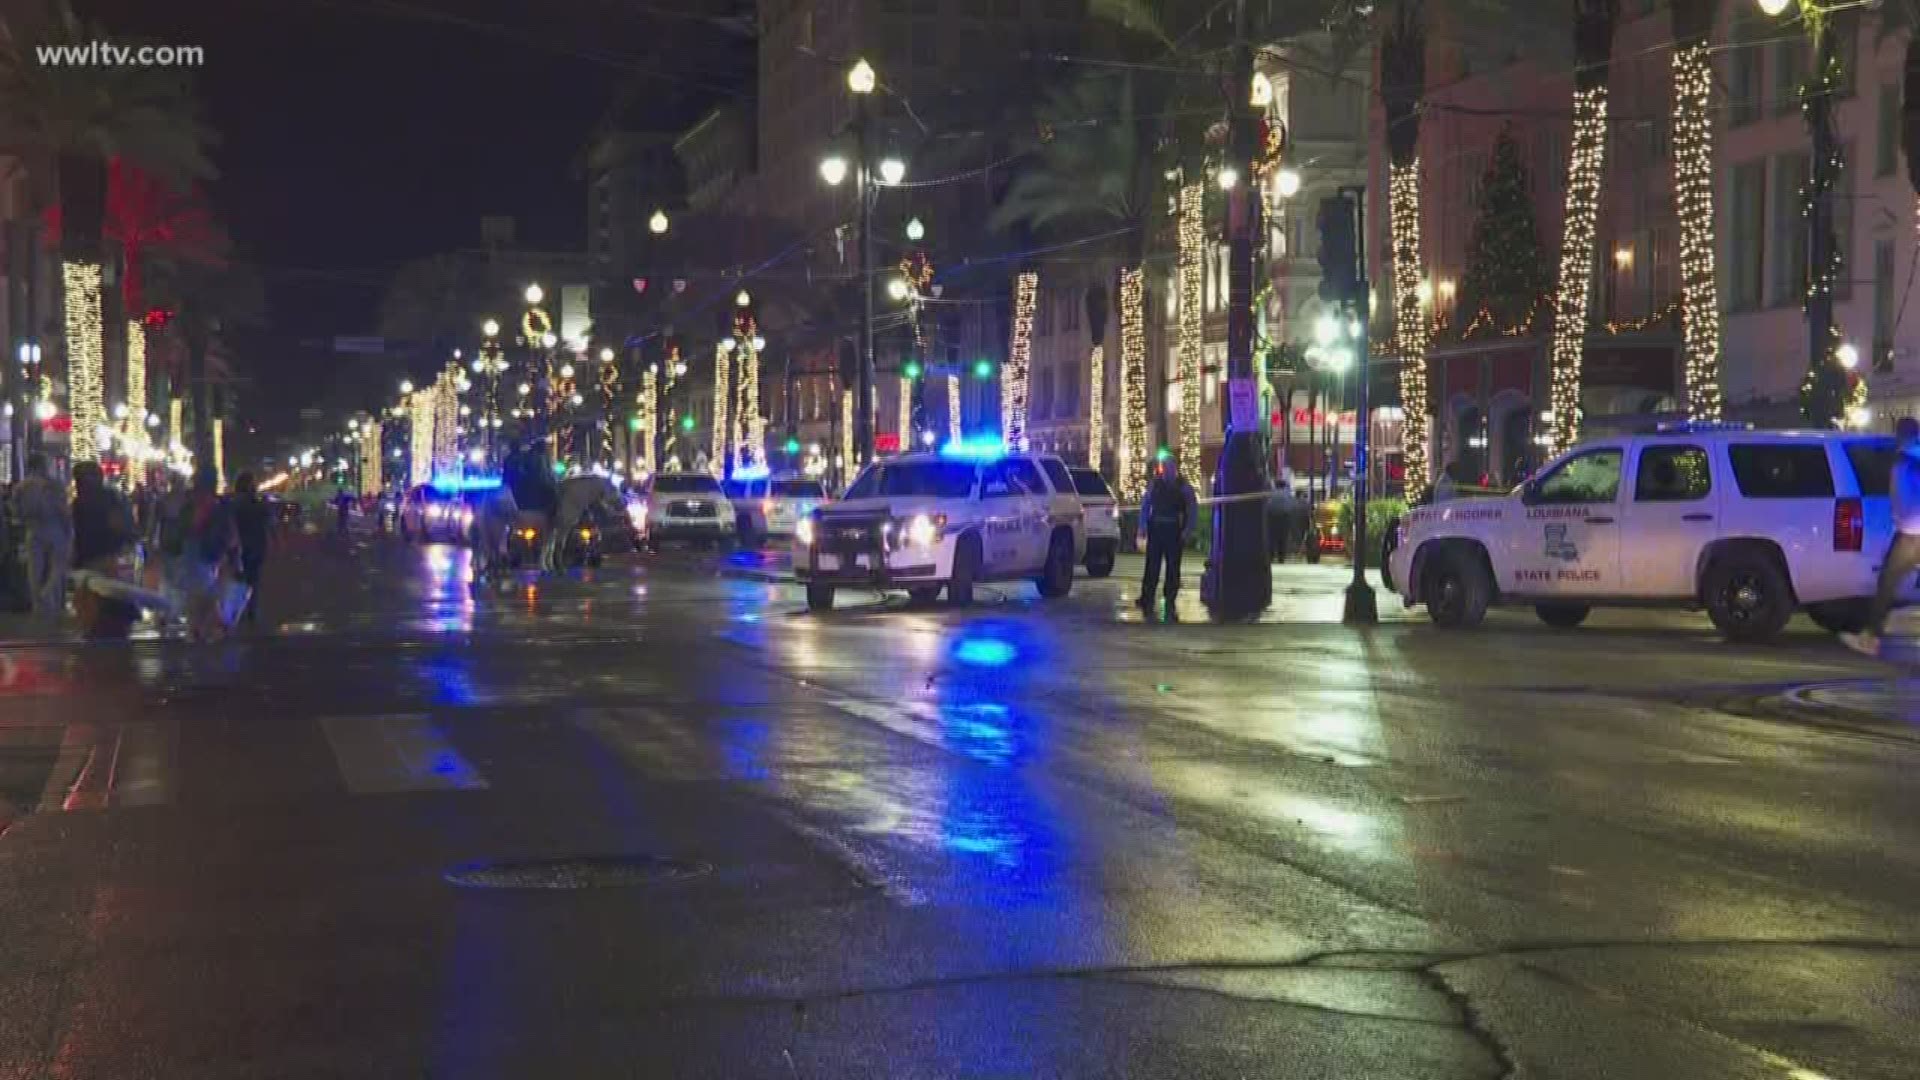 Update: An 11th victim was reported injured, according to the NOPD. Stay with WWLTV.com for the latest.